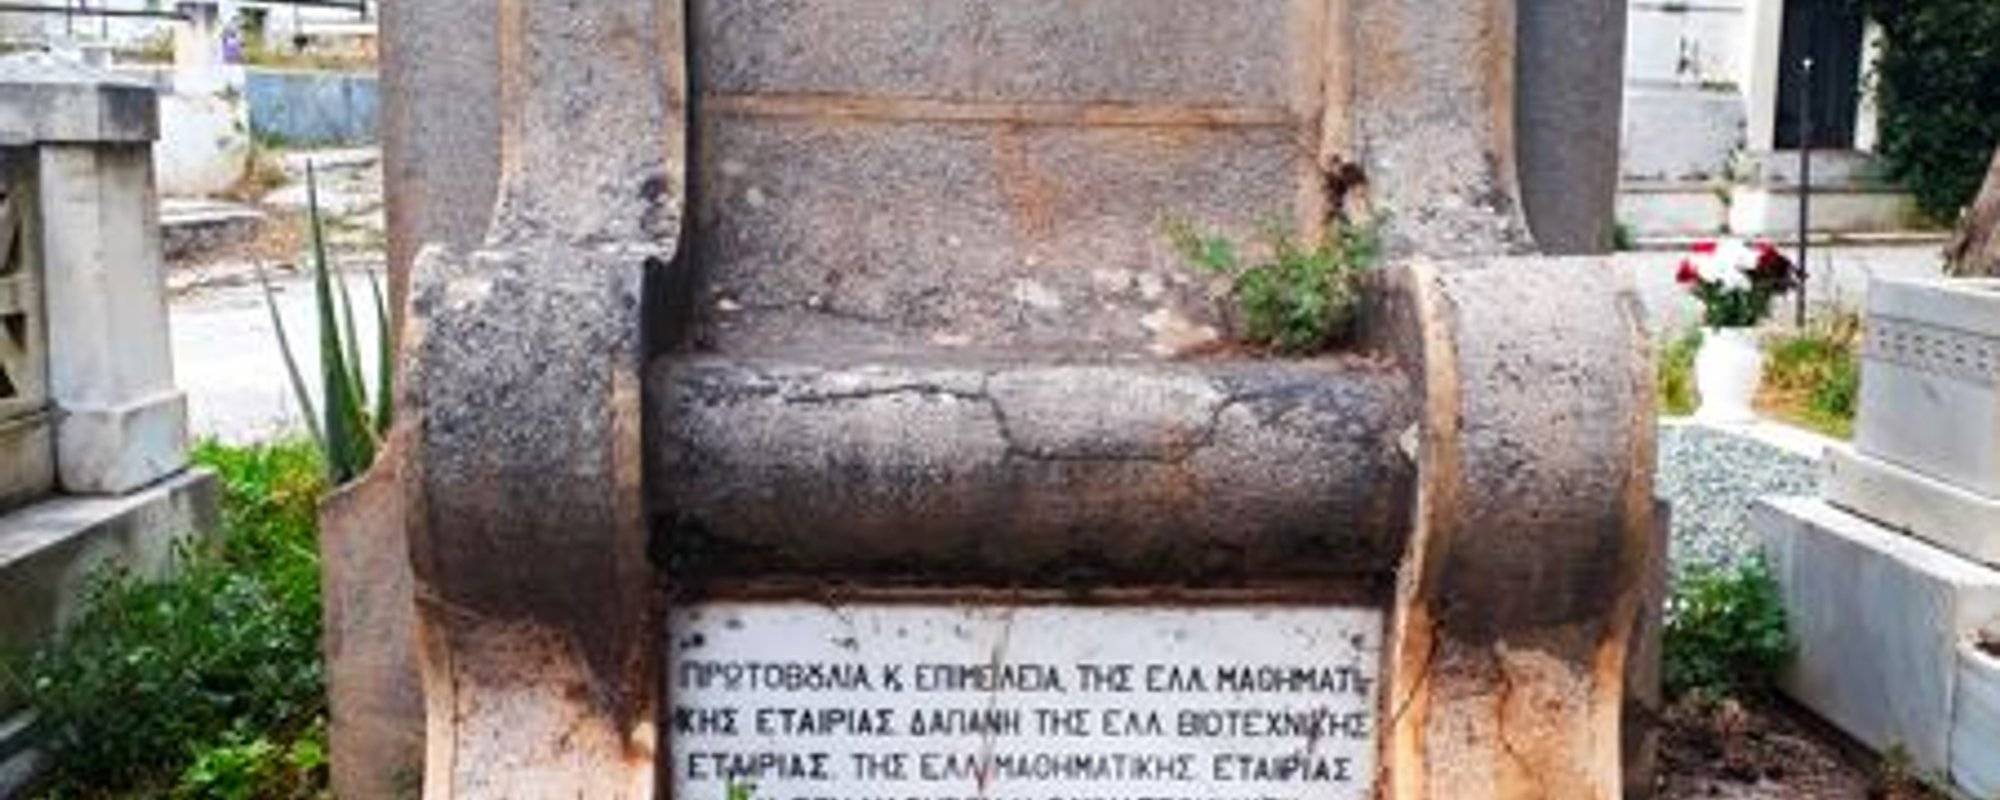 Travel Pro Places of Interest #152: Athens First Cemetery. Part Four (9 photos)